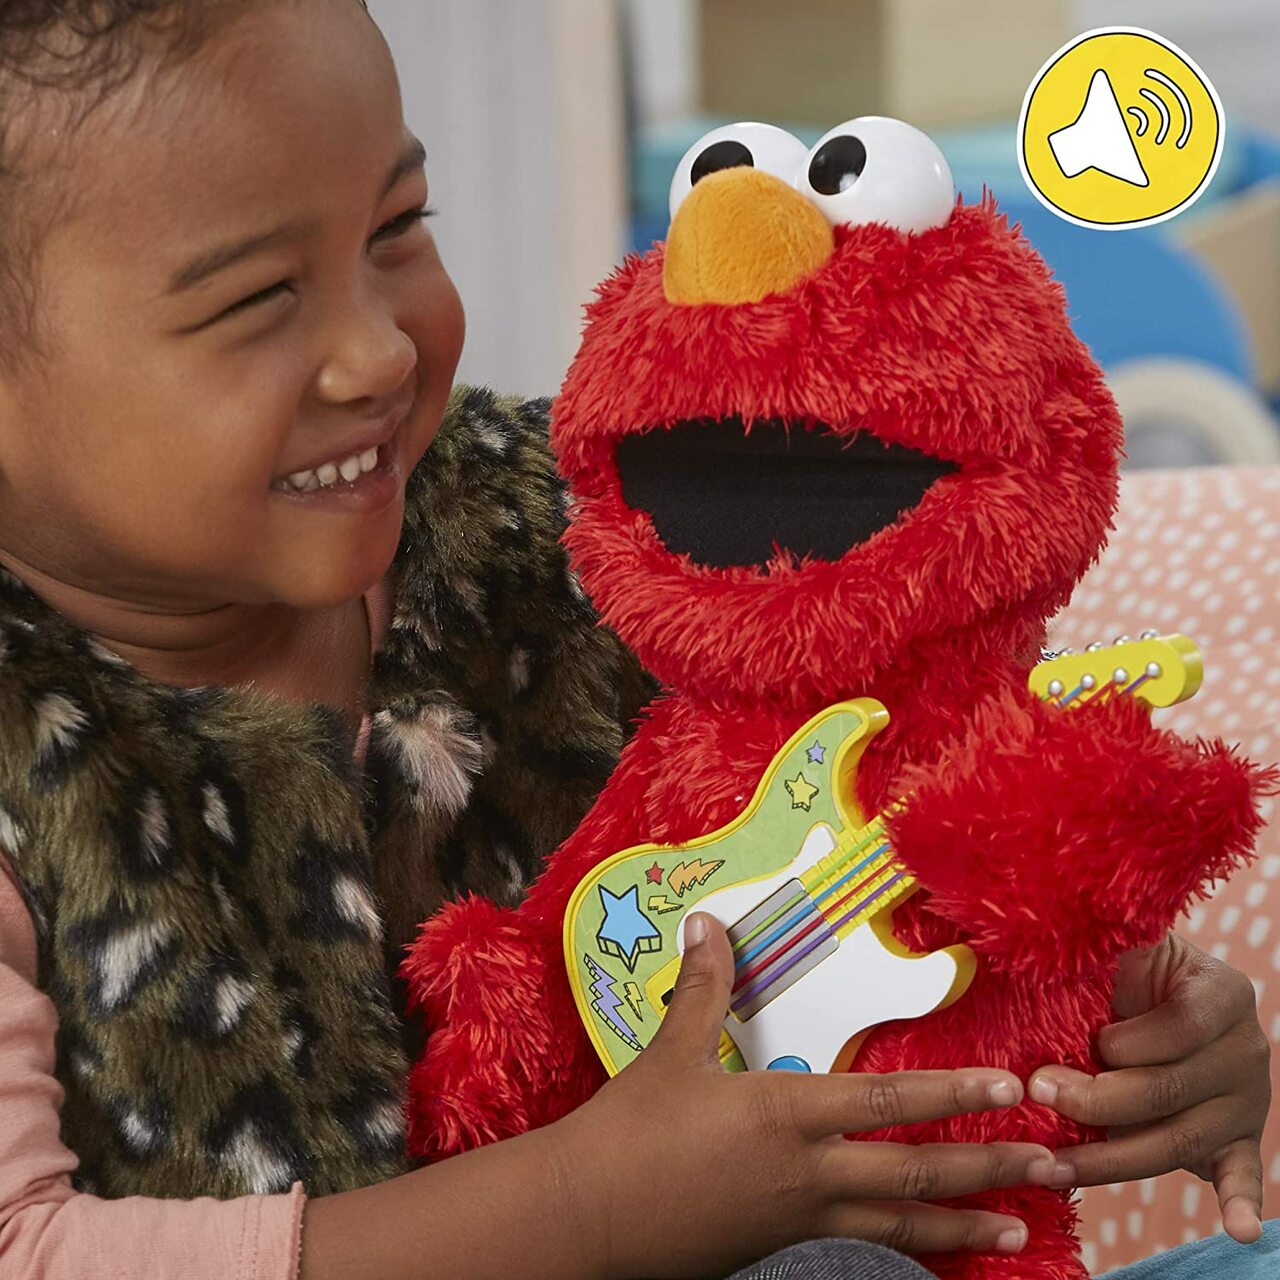 Sesame Street Rock and Rhyme Elmo Talking, Singing 14-Inch Plush Toy for Toddlers, Kids 18 Months & Up